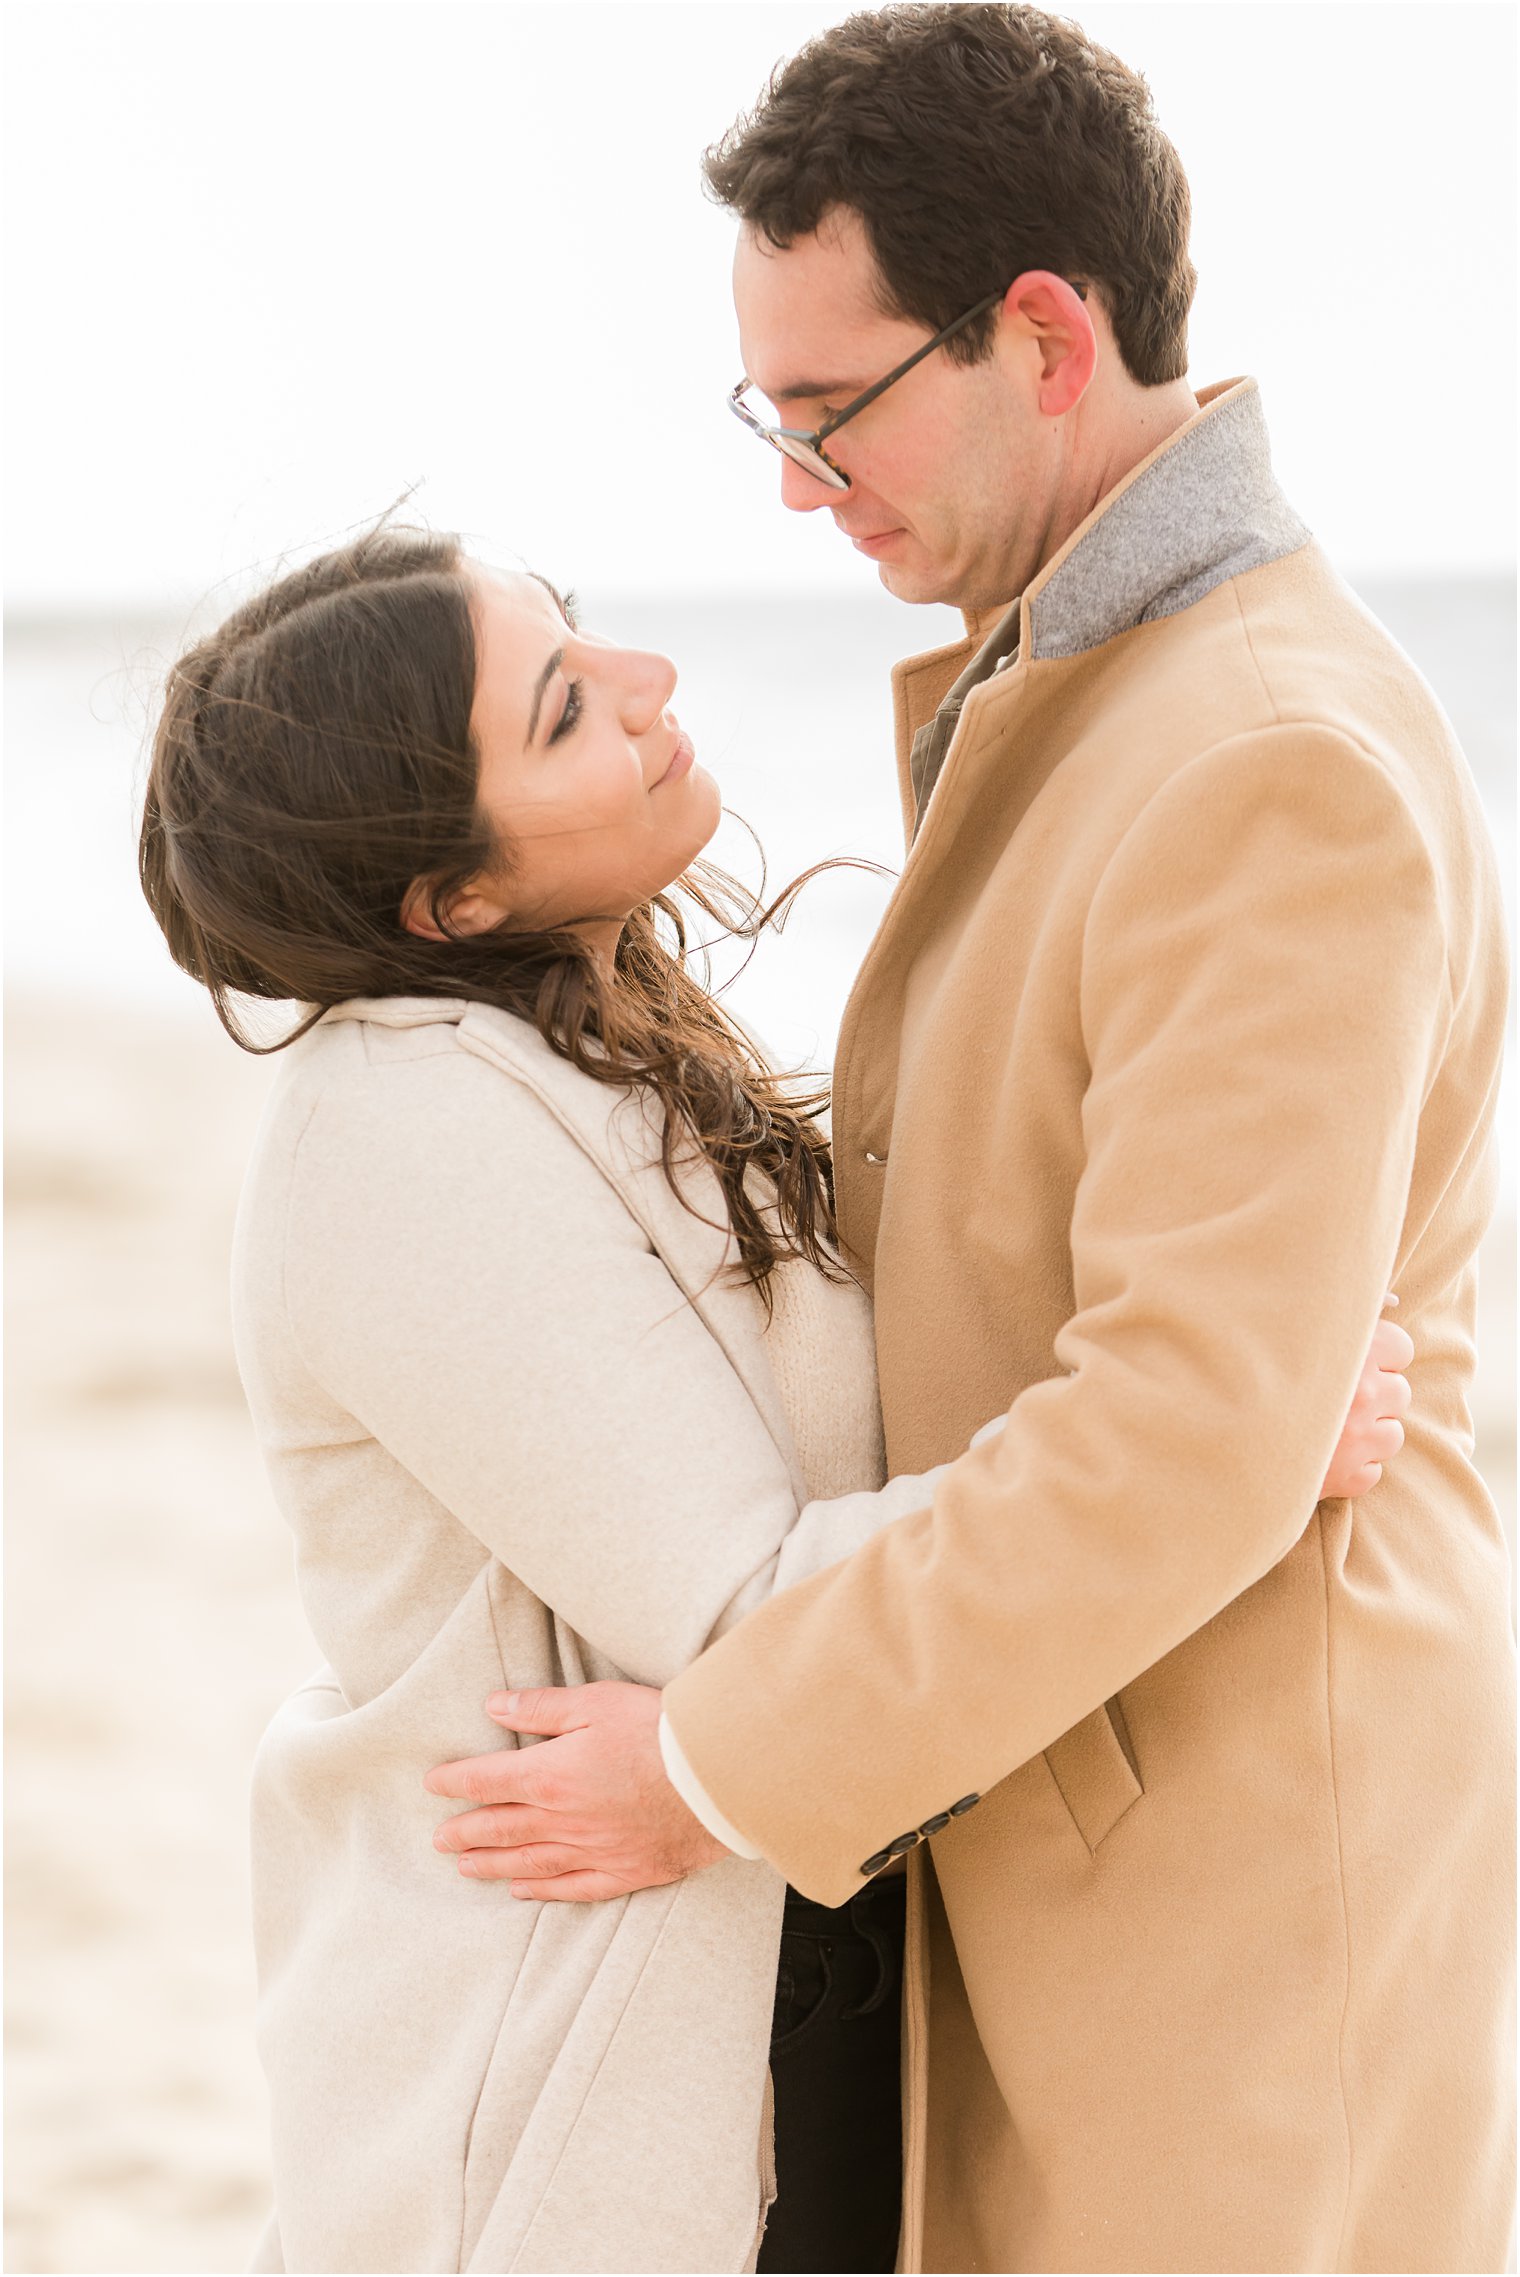 Engaged couple looking lovingly at each other on the beach in the winter